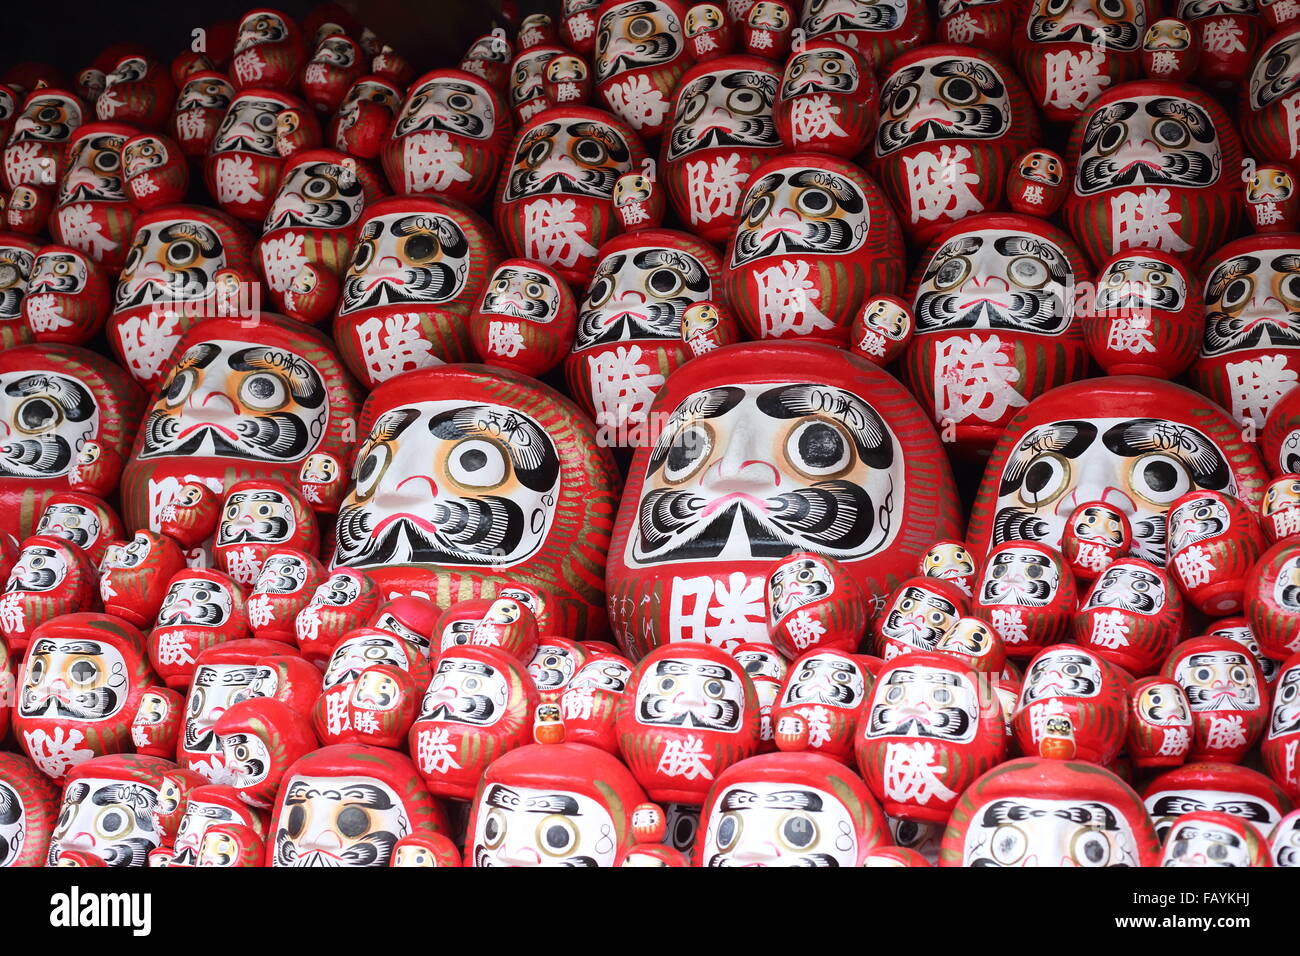 daruma or red-painted good-luck doll in Japan Stock Photo